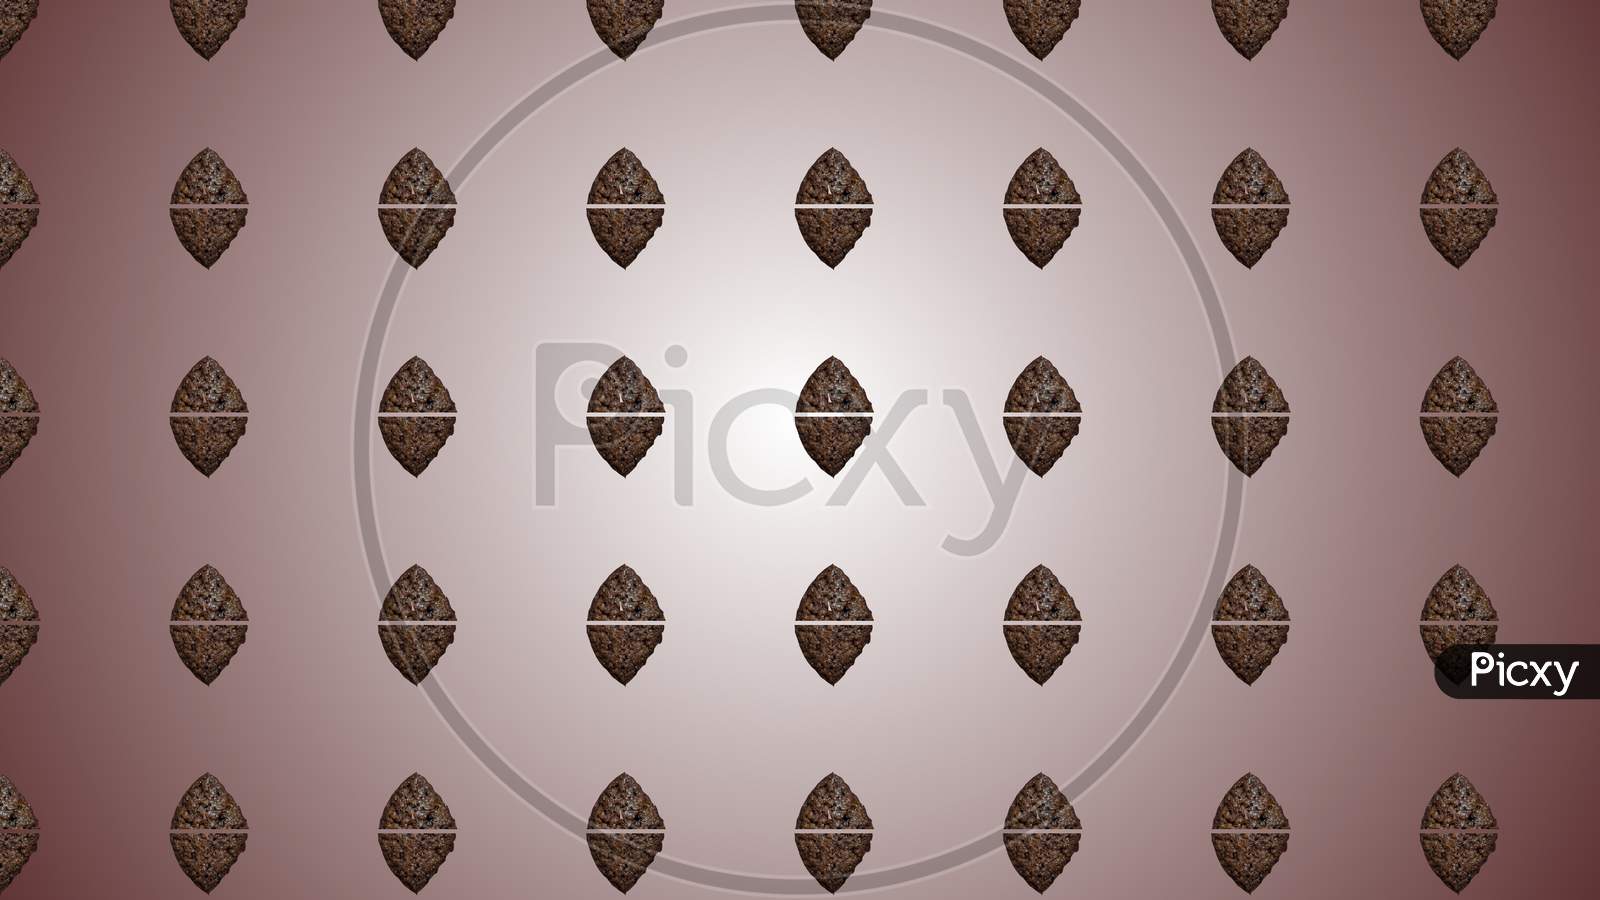 Continuous Repeated Pattern Of Oval Shape Chocolate Cake, Isolated On Brown Background.